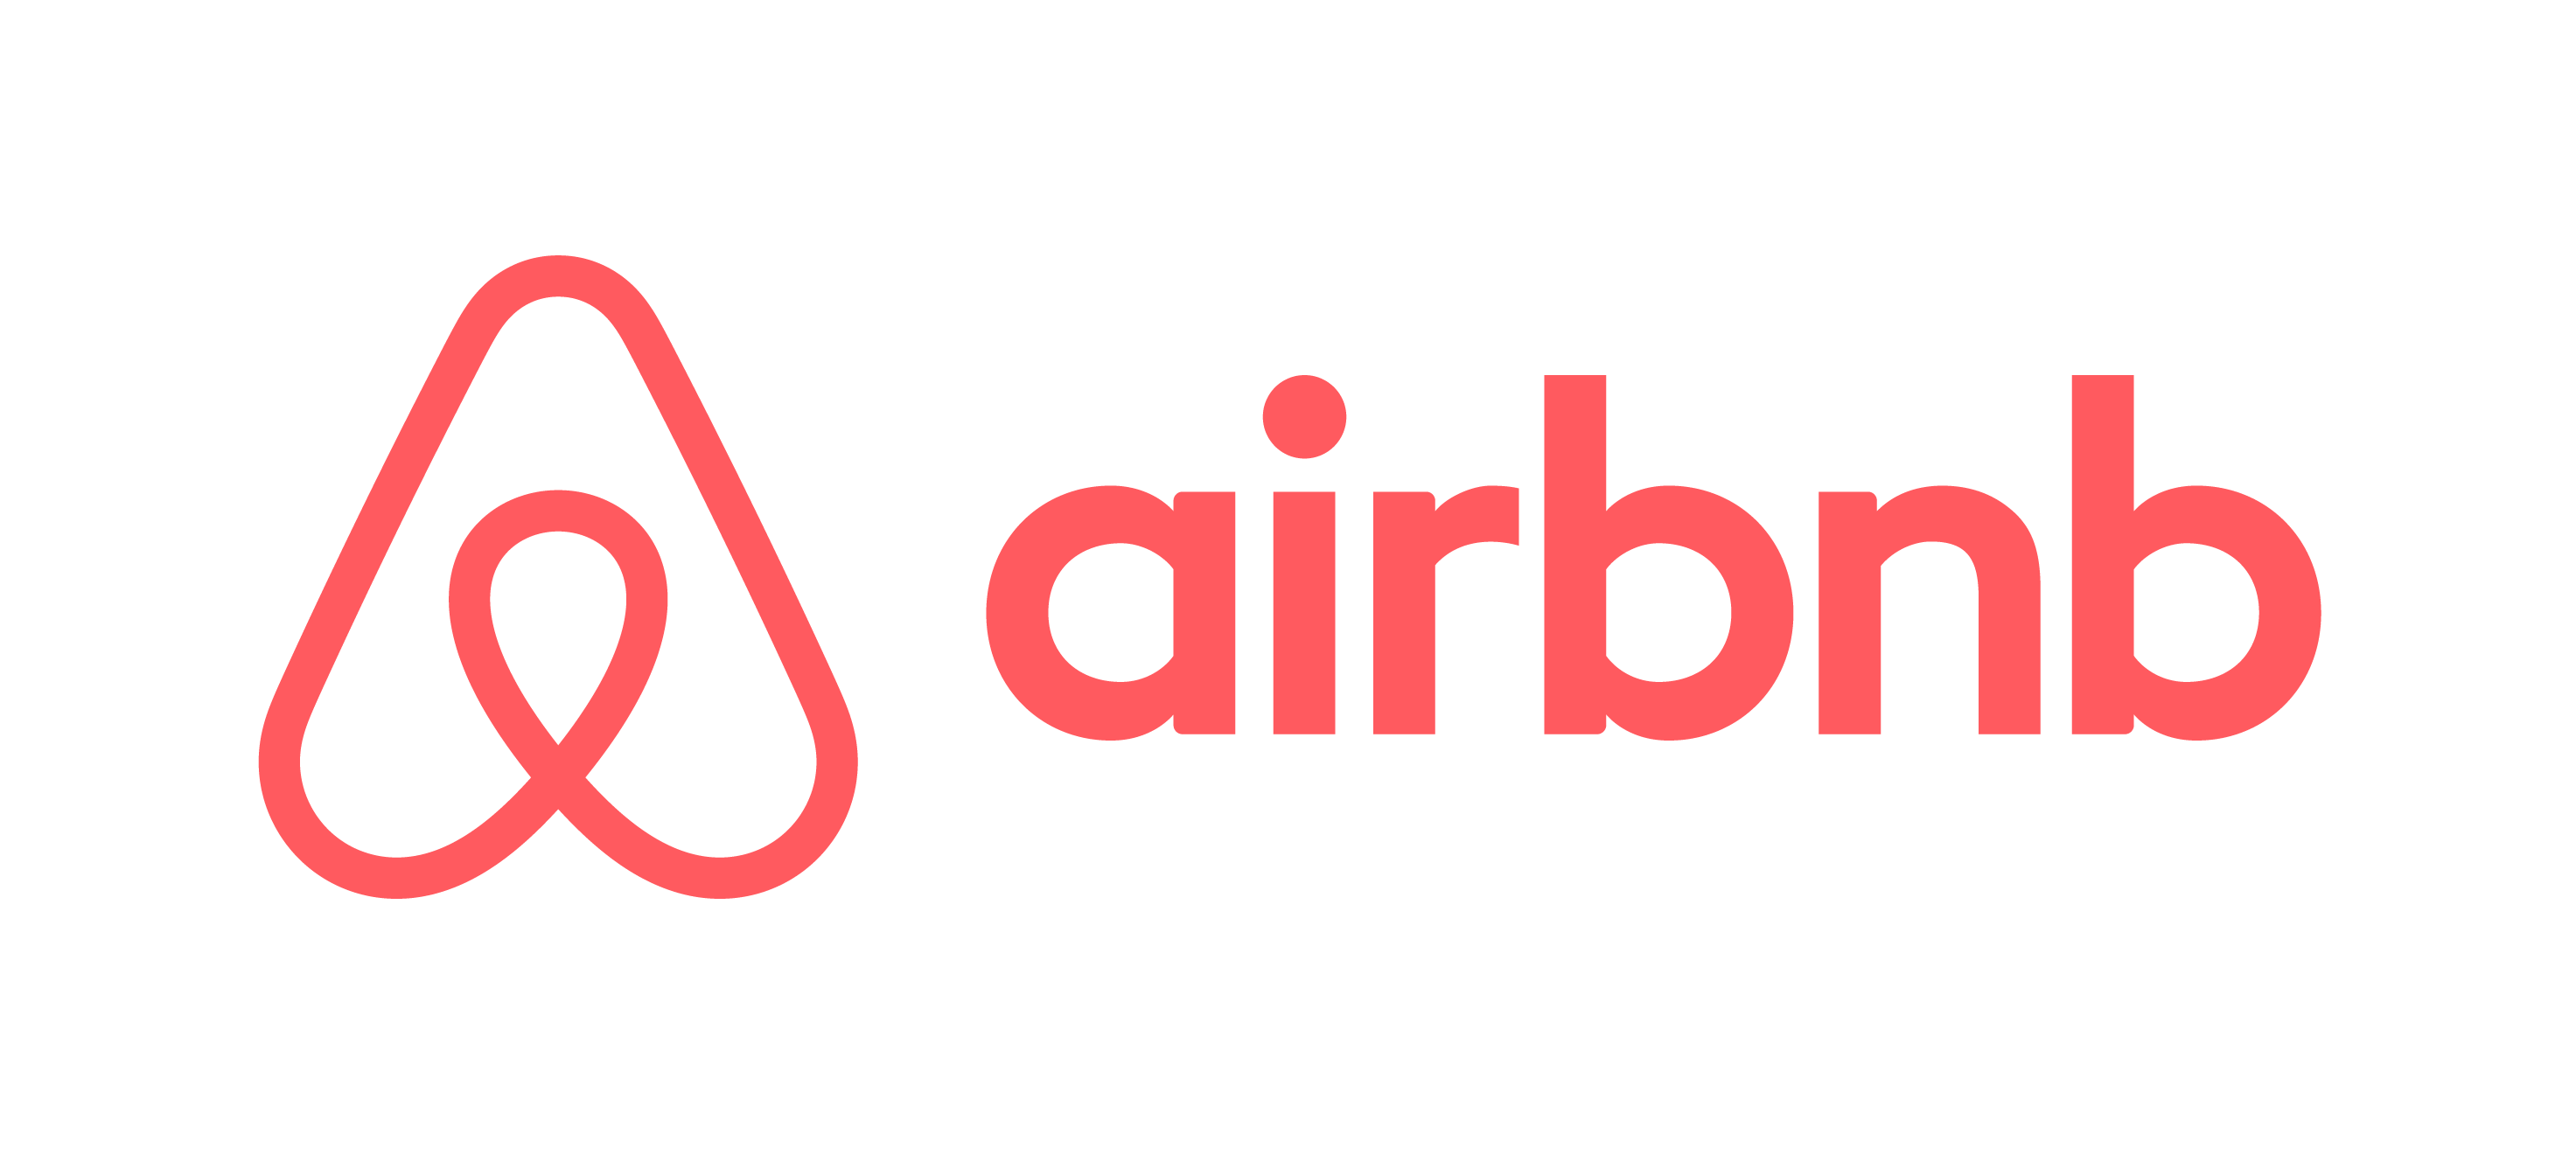 How to get an Airbnb discount code